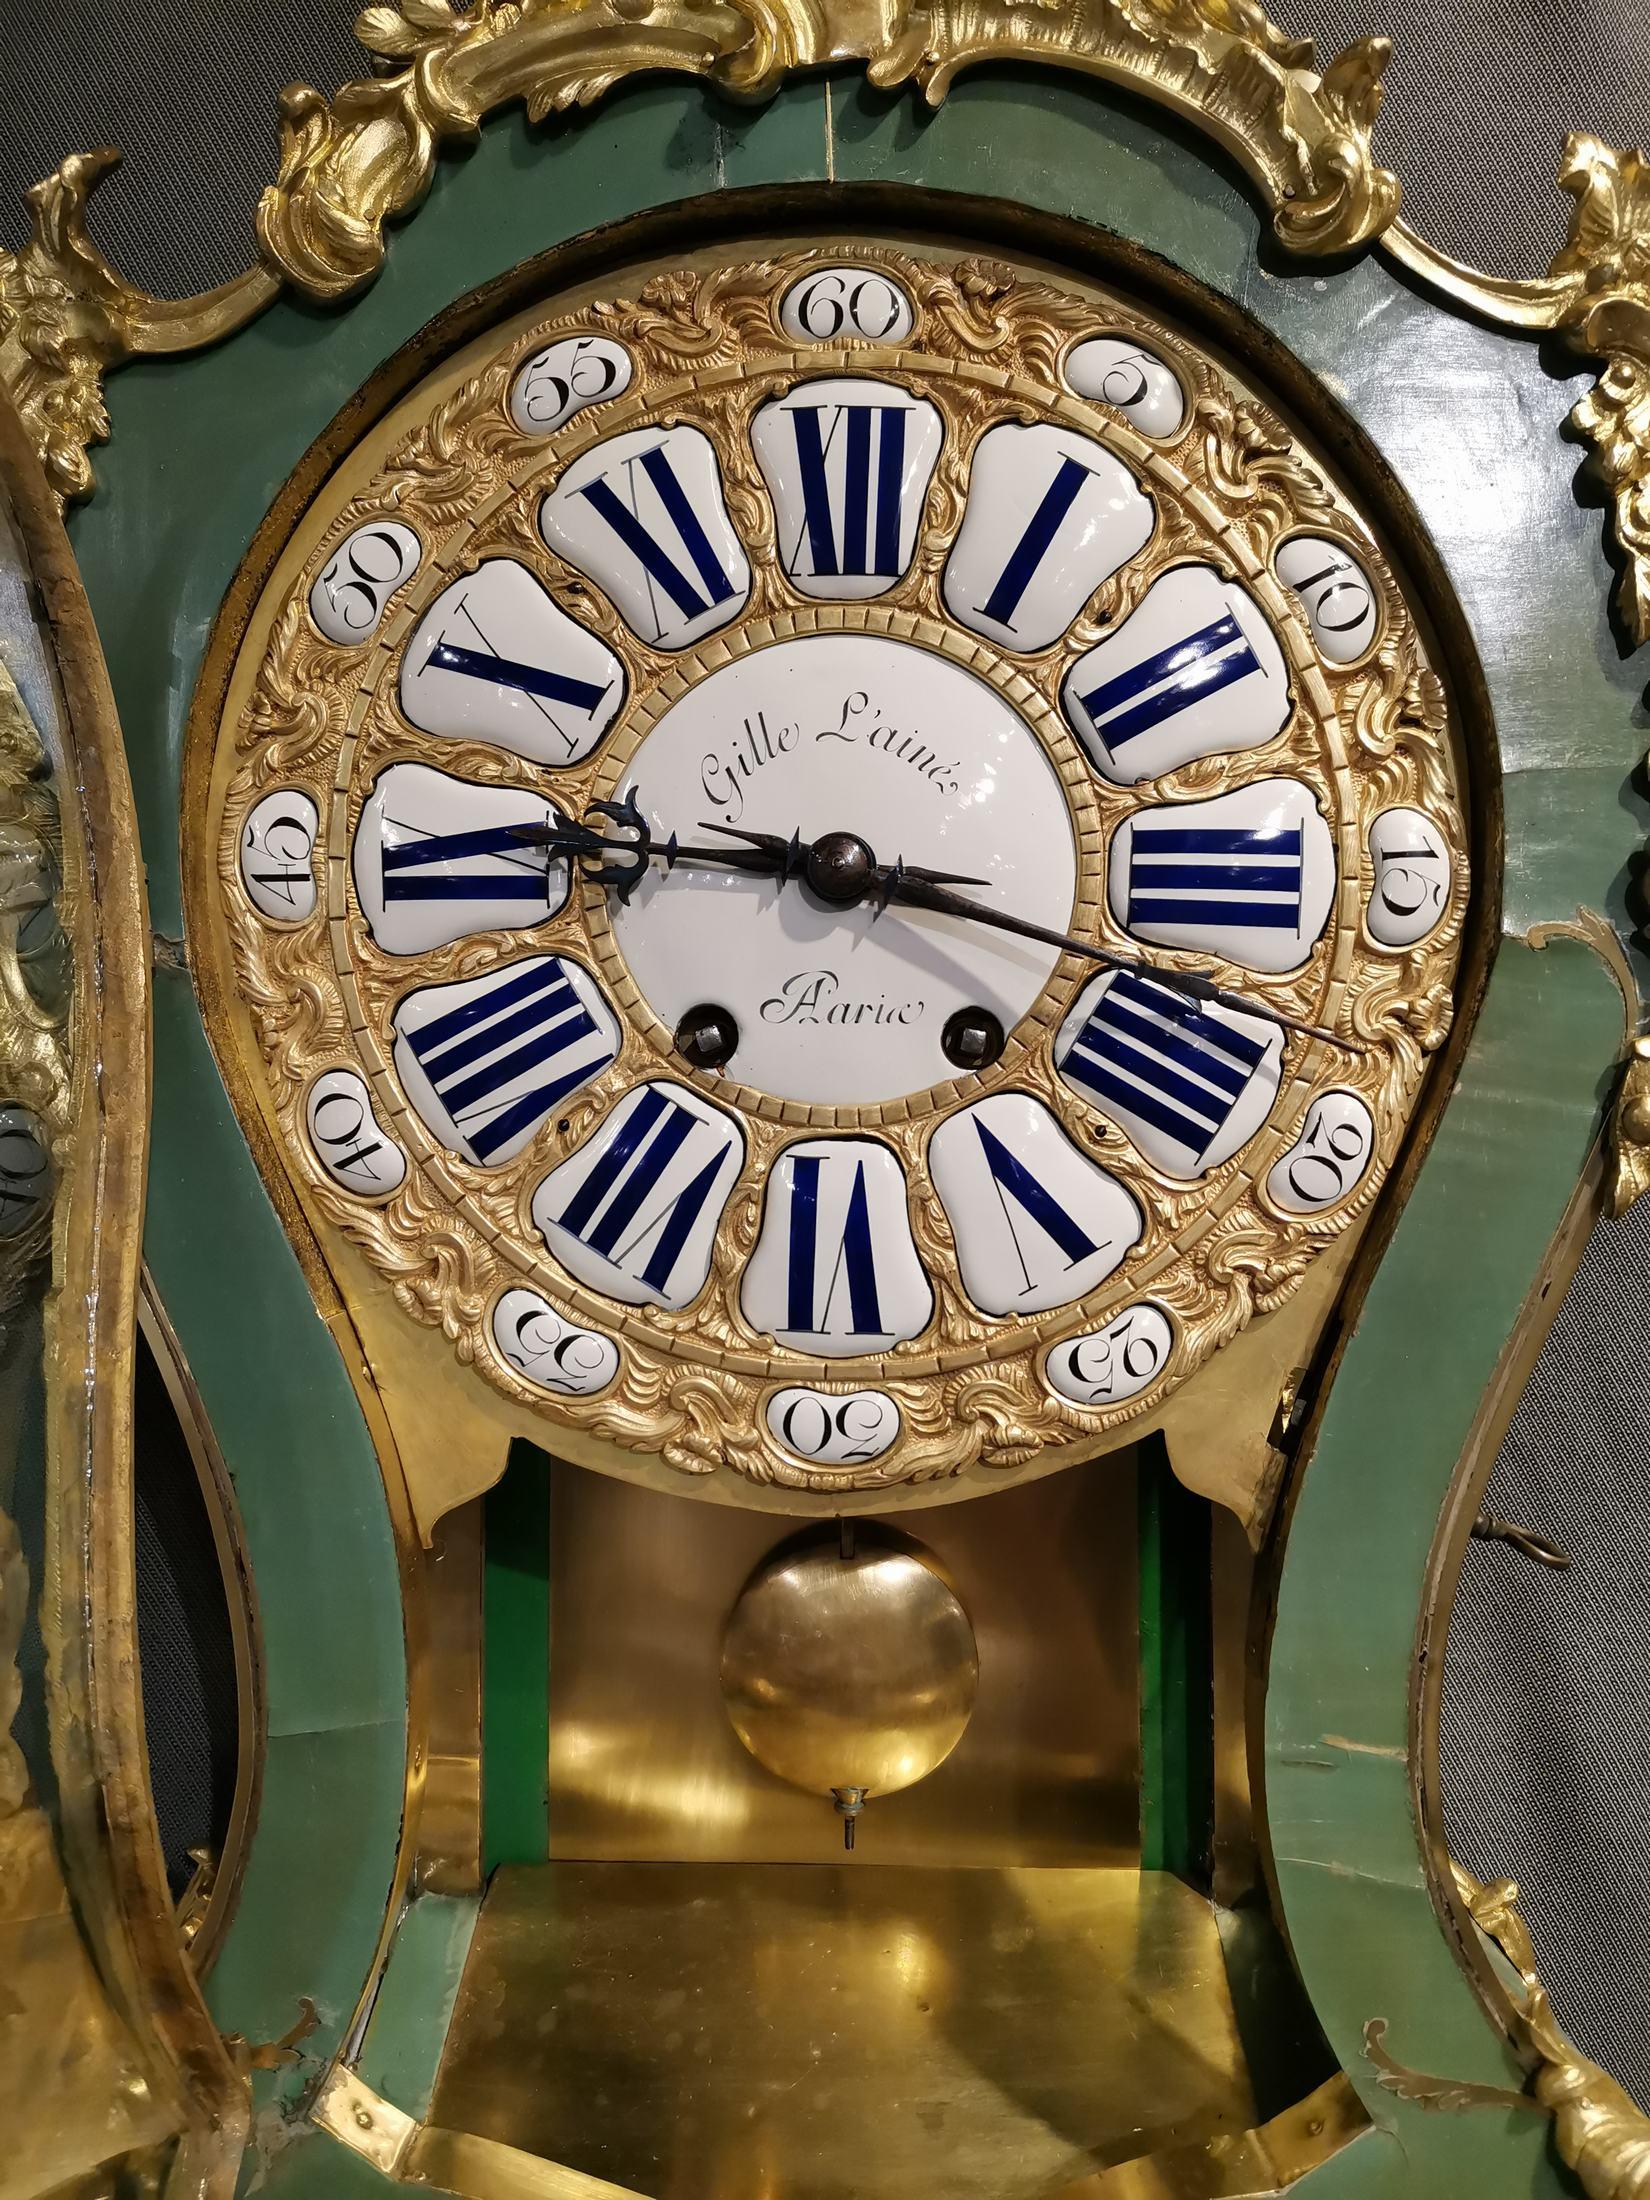 Important Cartel in green horn Veneer Gille L Aine 18th, gilded bronzes and brass inlays chiseled with foliage of flowers and natural patterns. 
The dial is enamelled cartridge, work of Gille L'aine / A Paris (received master in Paris in